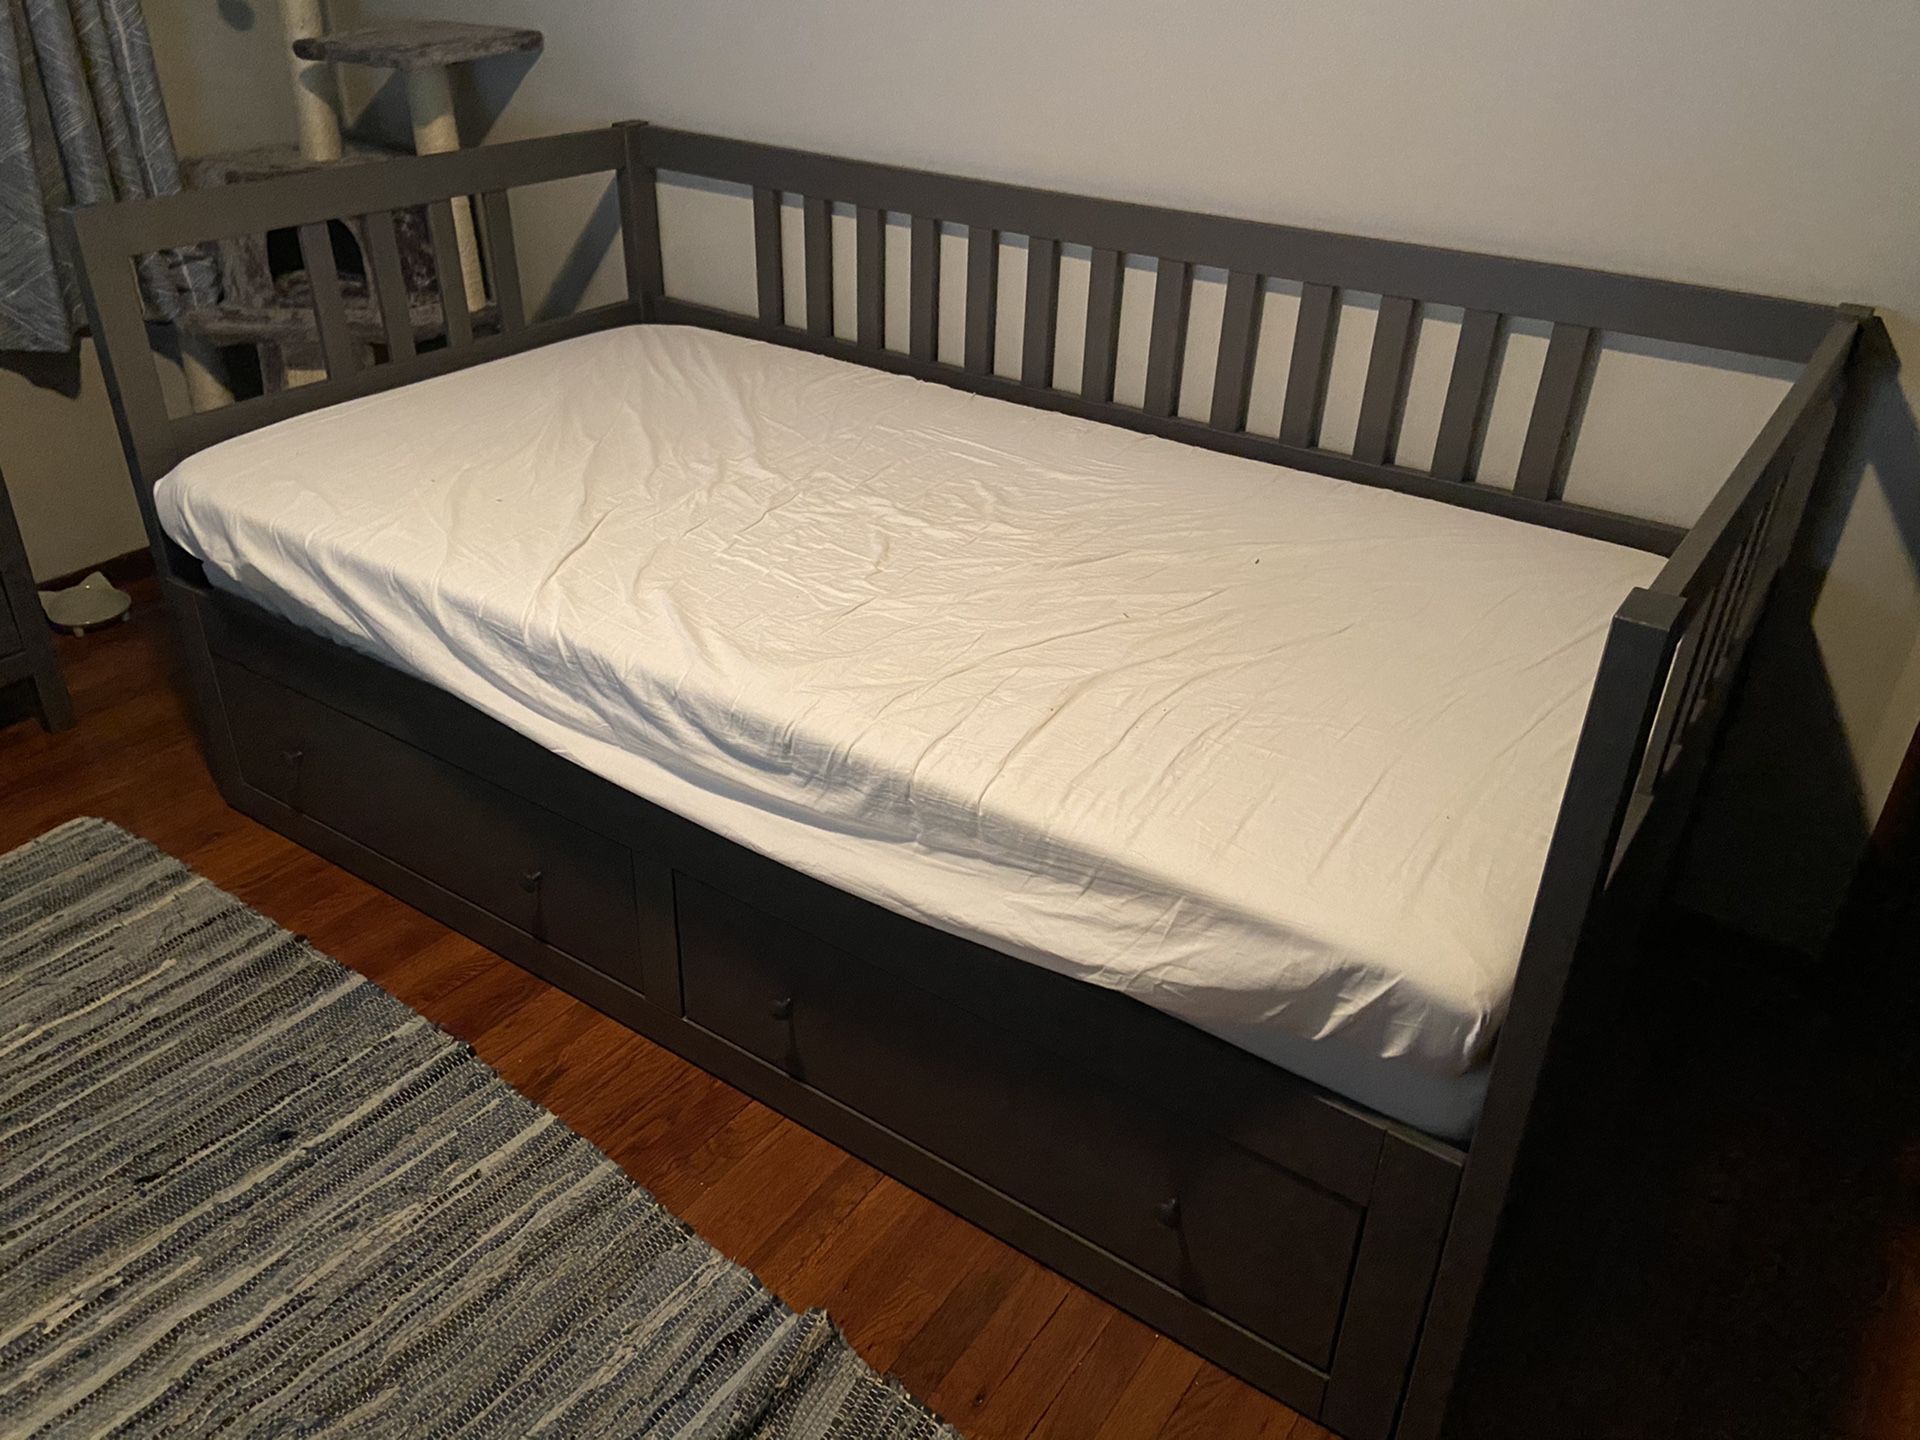 Trundle bed - includes 2 twin mattress